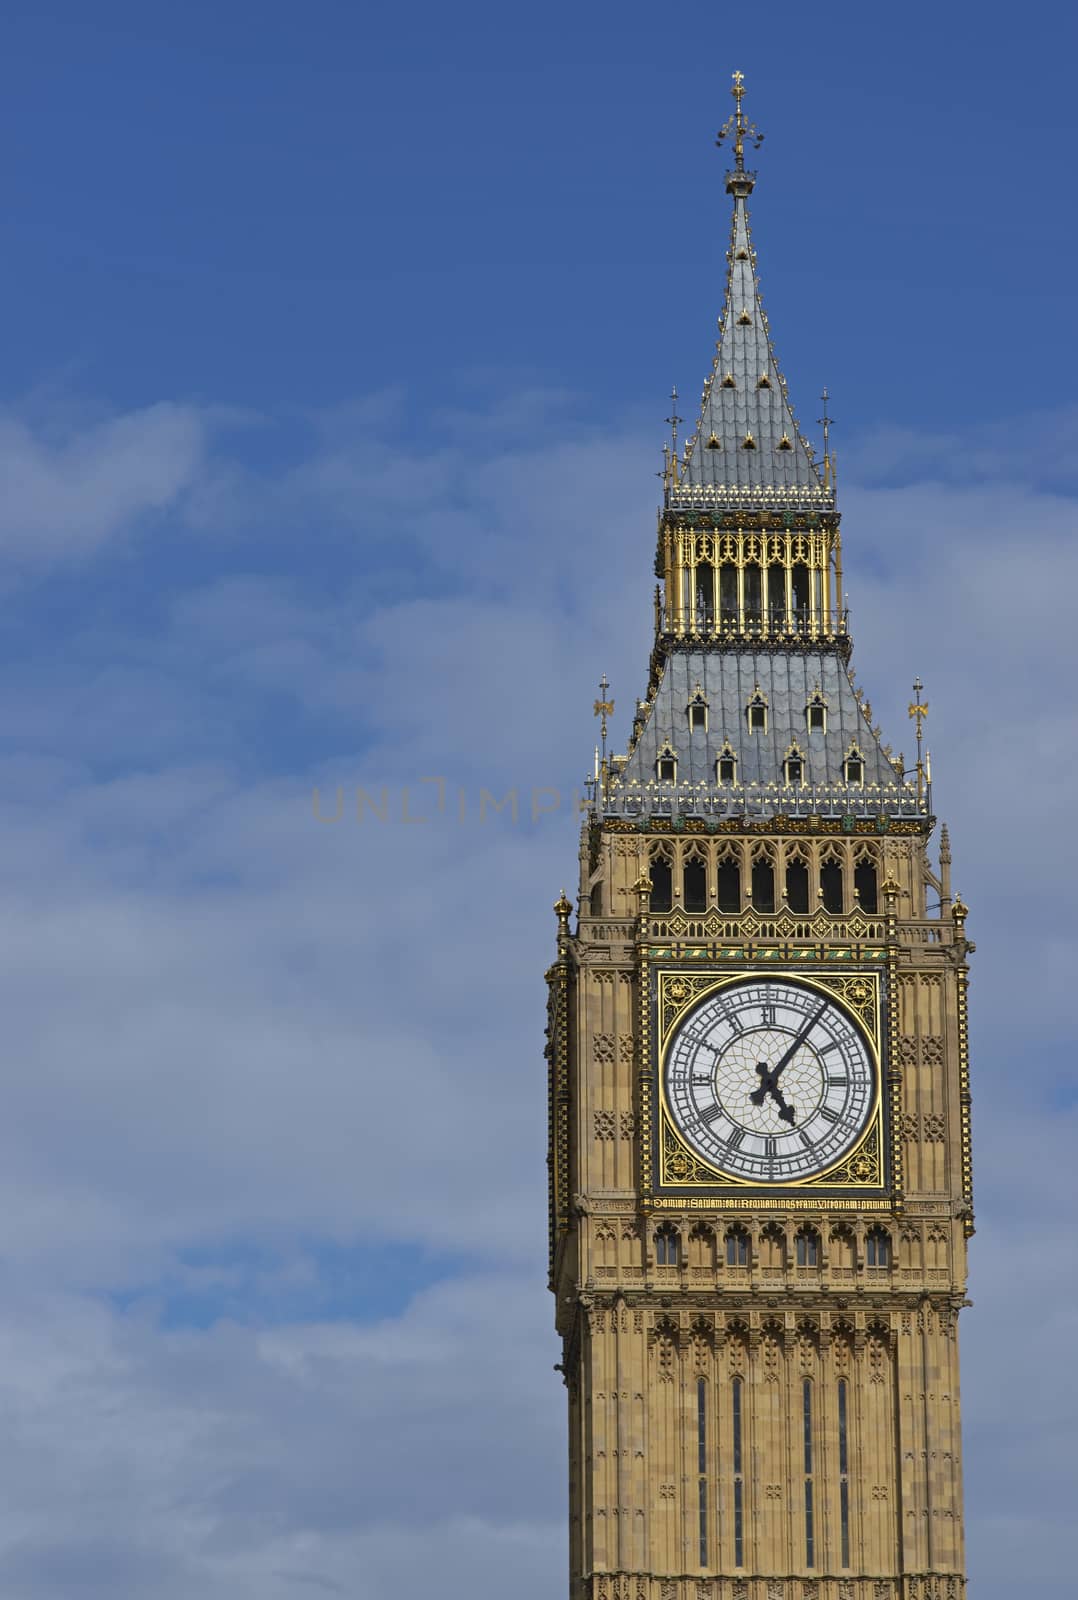 Elizabeth Tower of the Houses of Parliament in London, England. Previously called the Clock Tower, it houses the bell named Big Ben.